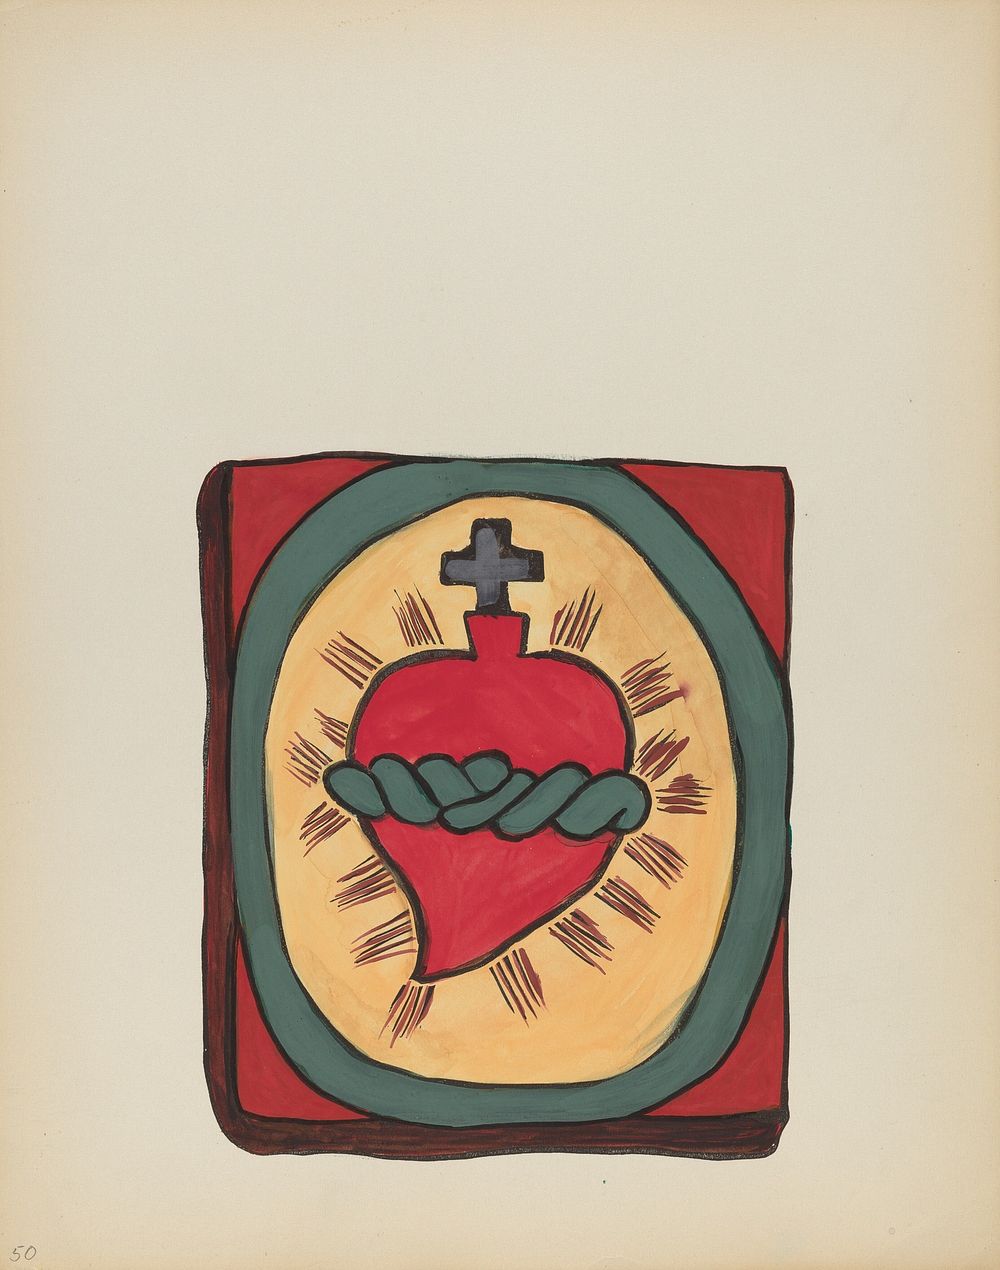 Plate 50: Sacred Heart: From Portfolio "Spanish Colonial Designs of New Mexico" (1935&ndash;1942) from the American 20th…